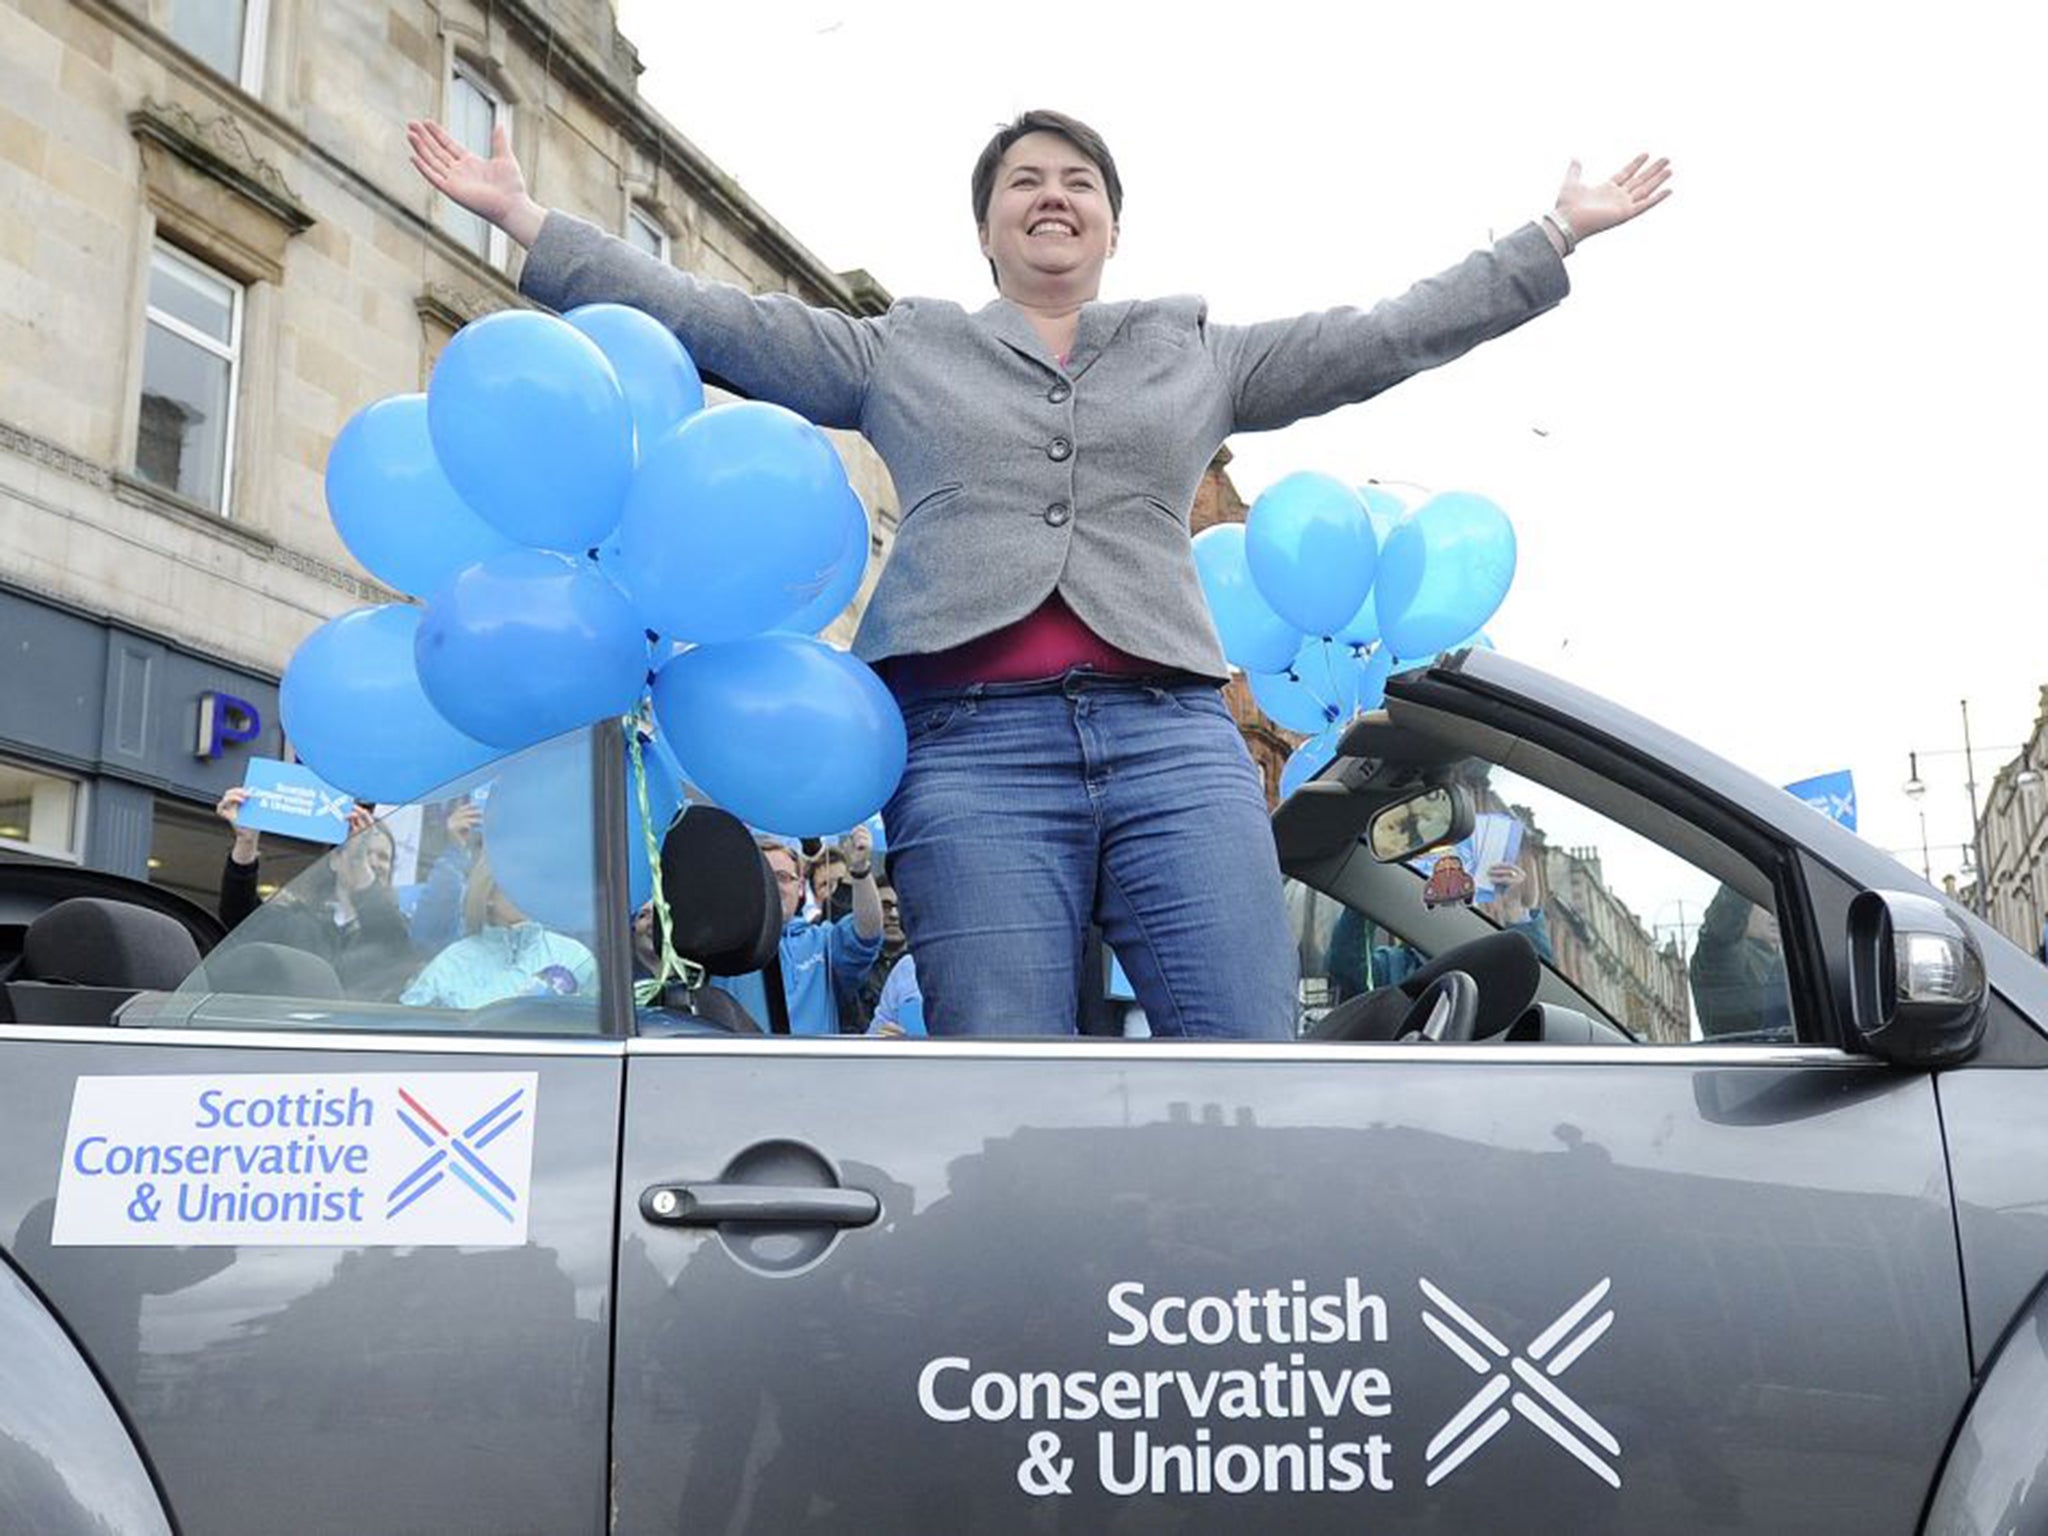 Leader of the Scottish Conservatives, Ruth Davidson, campaigning in Hamilton, Scotland in the run up to the UK general election last May